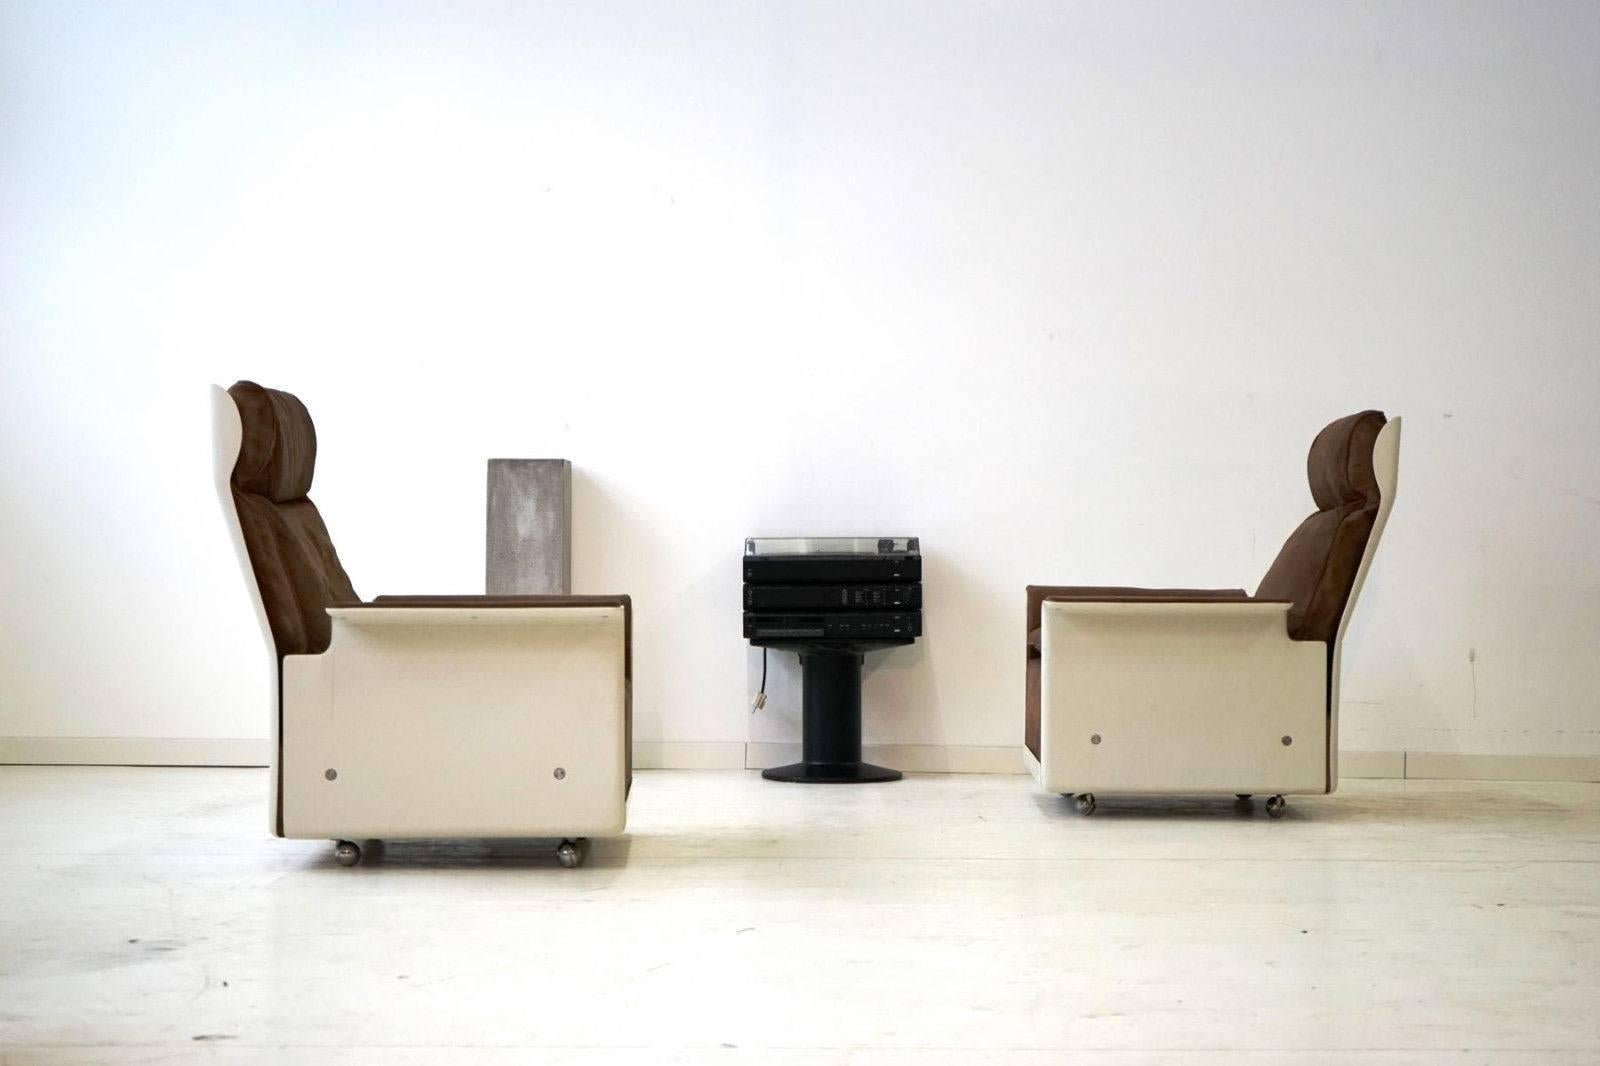 Set of two lounge armchairs Dieter Rams for Vitsoe, RZ 62 620, Nubuck Leather
Set of two armchairs in leather in the popular color medium brown. This RZ 62 model is a very early version with production from the 1970s. The upholstery is impeccably